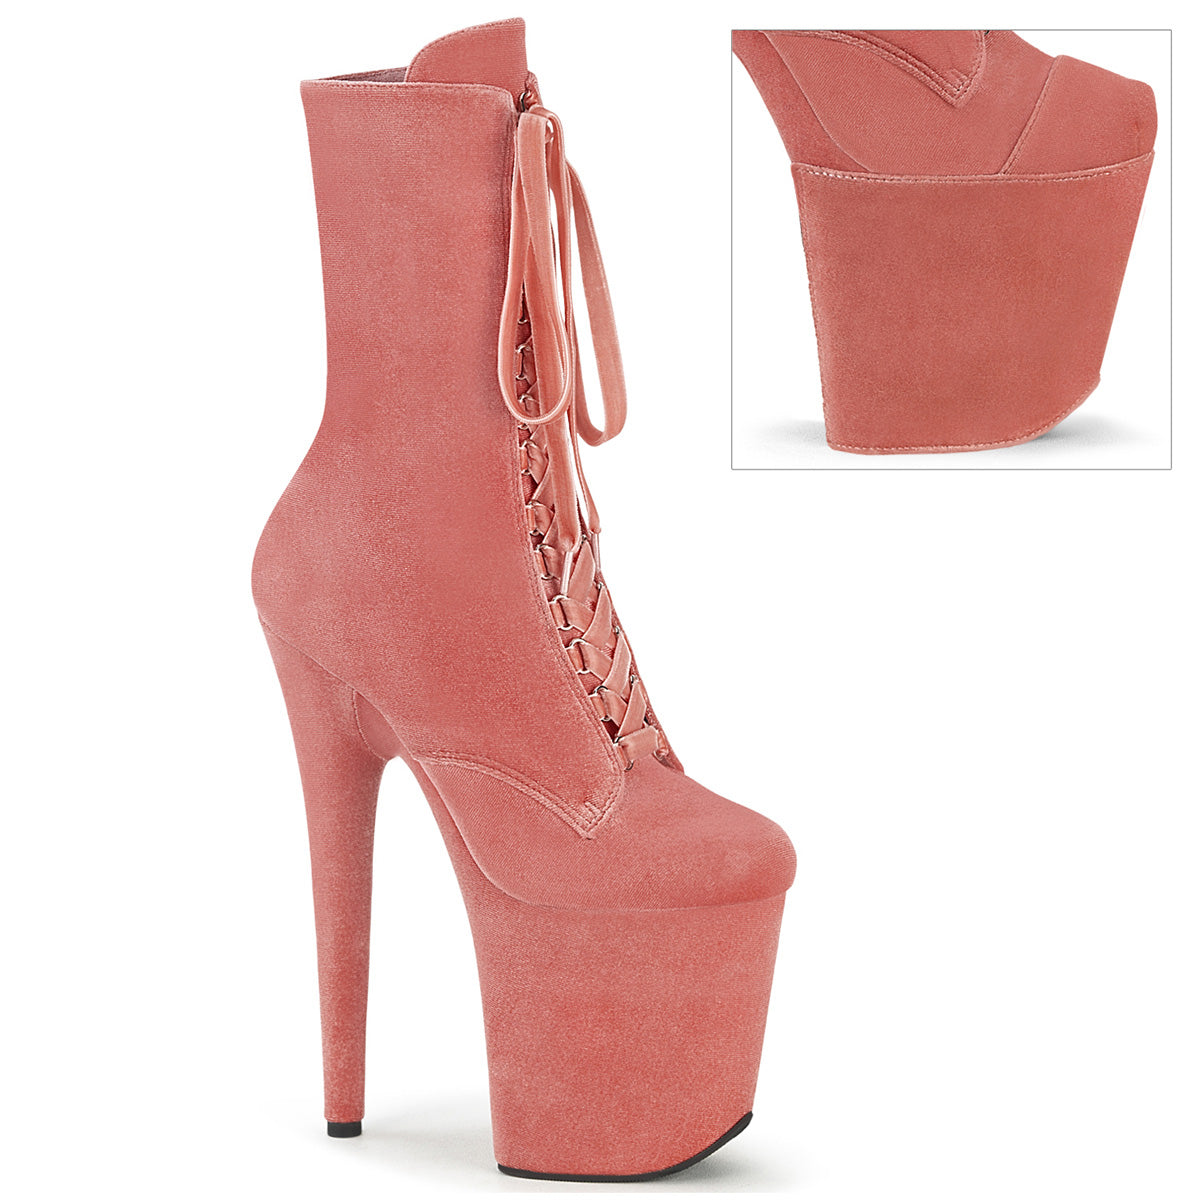 FLAMINGO-1045VEL Velvet Lace-Up Front Ankle Boot Pink Multi view 1